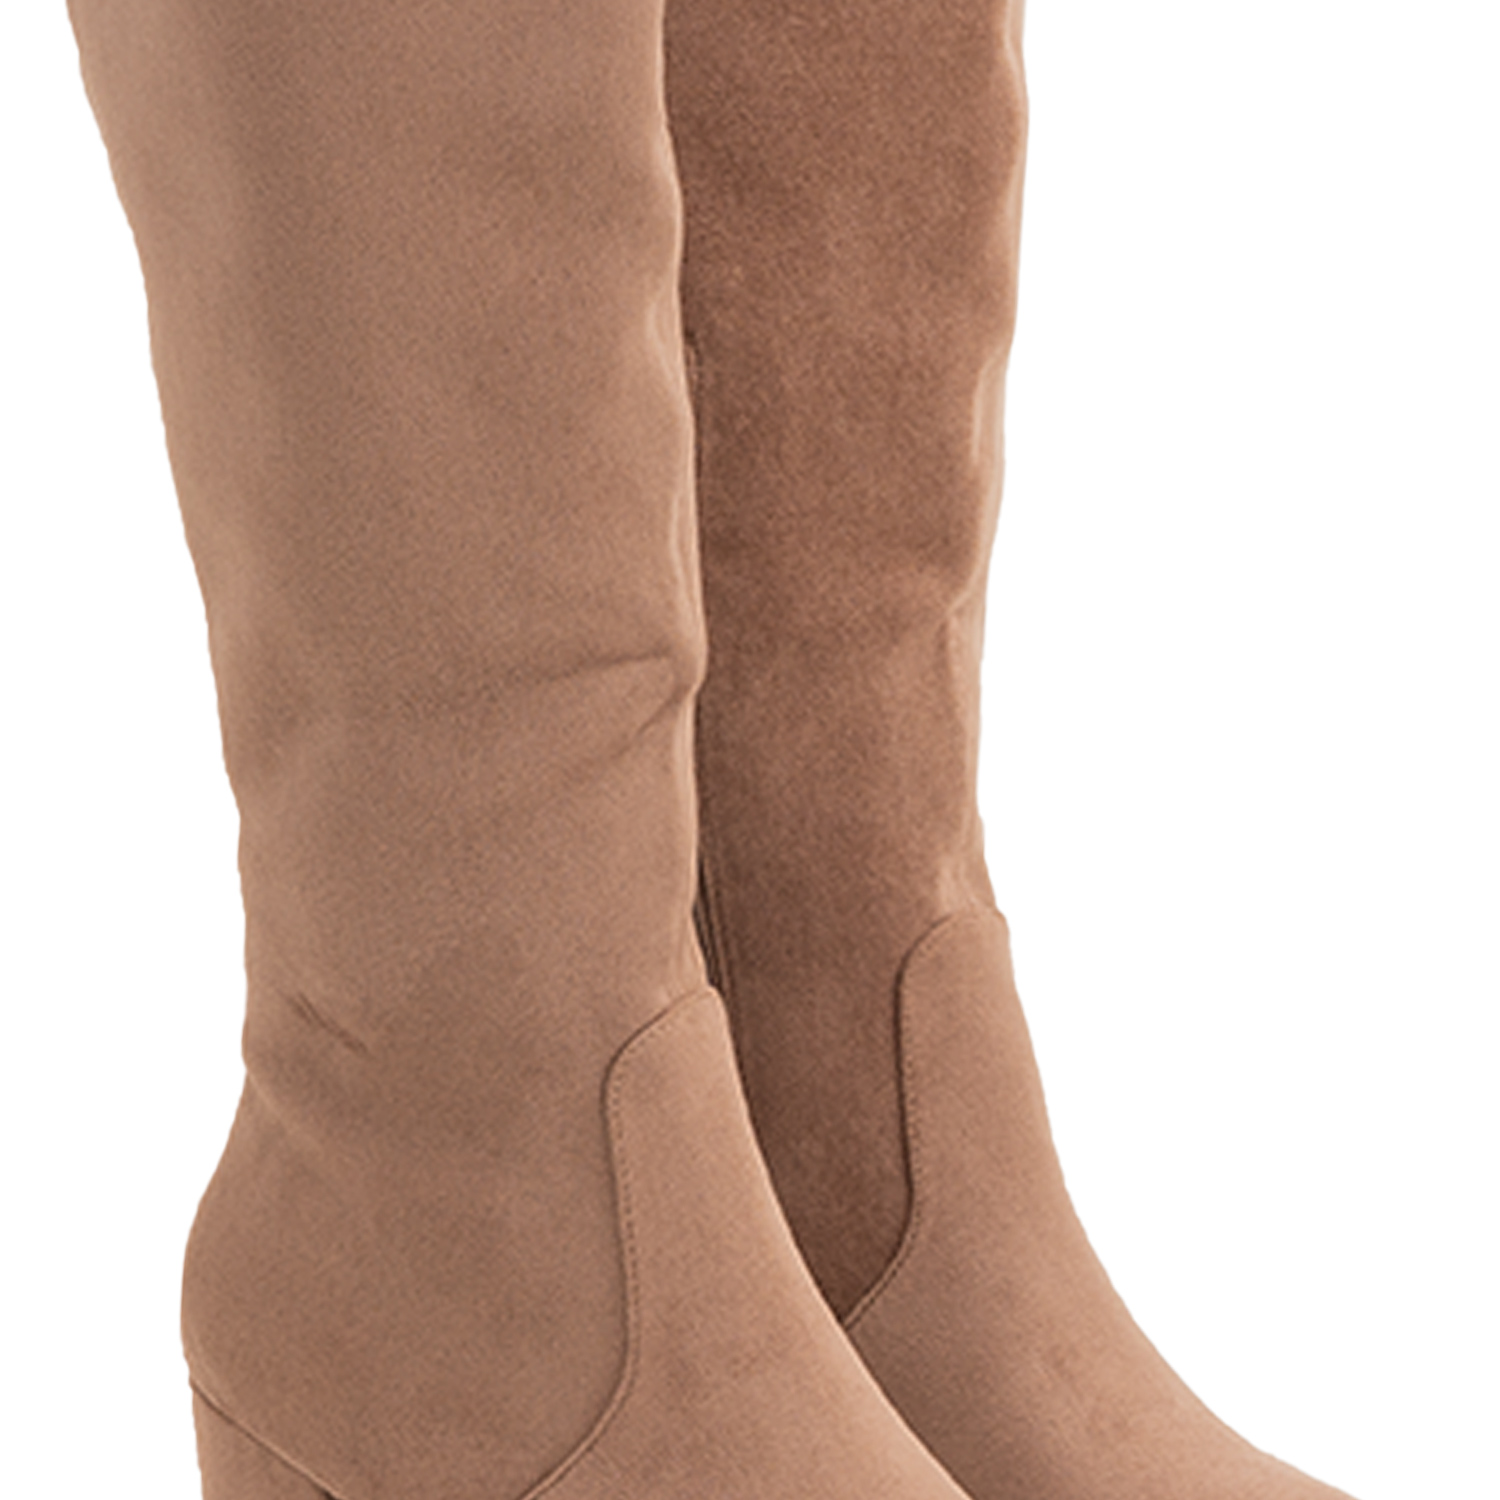 Heeled mid-calf boots in light brown faux suede 